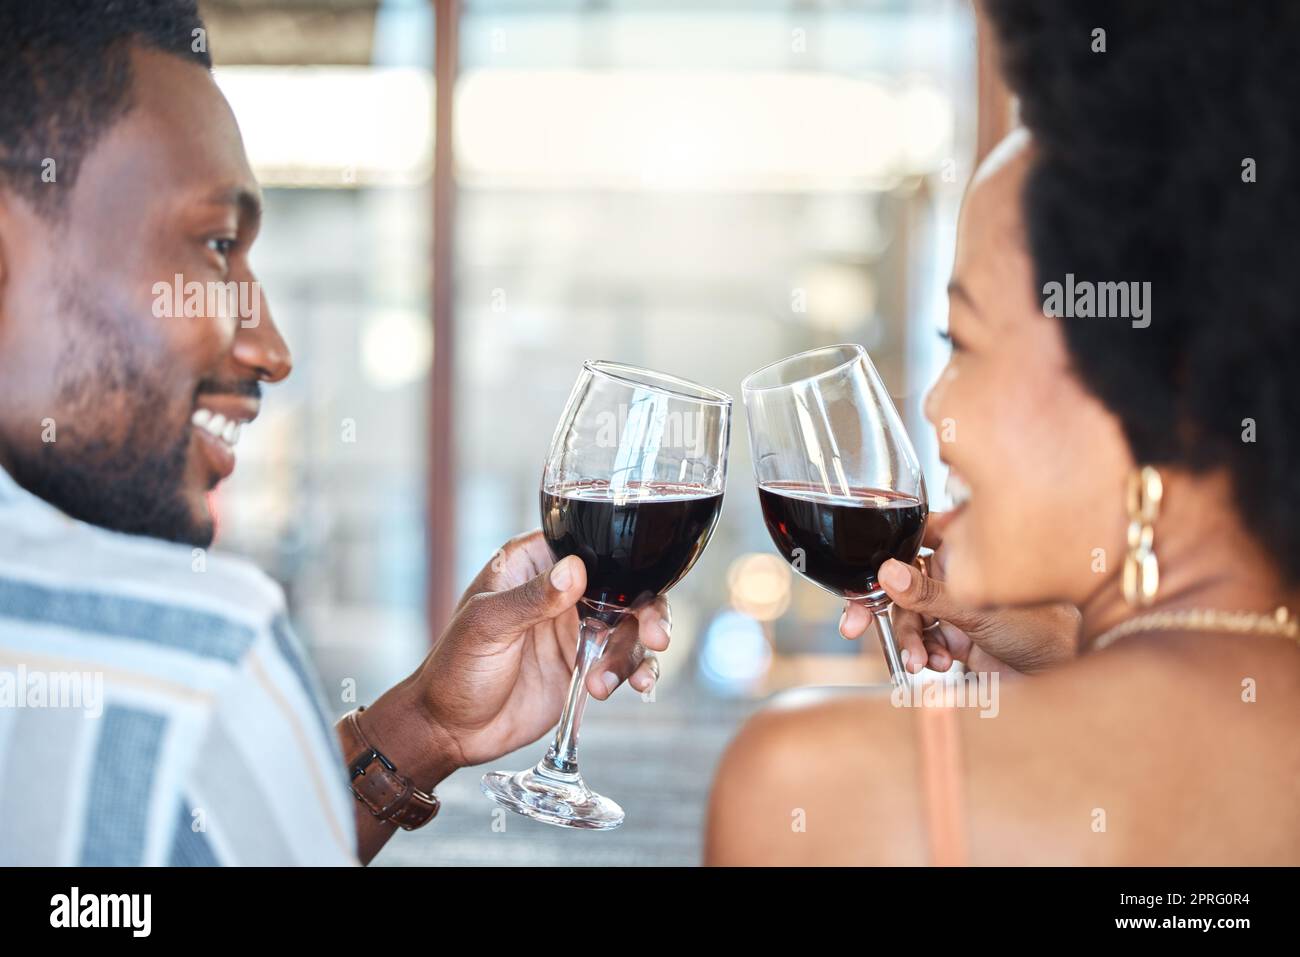 Couple giving cheers, toast and celebrate with wine glass, champagne and alcohol drinks on a romantic date together. Love, relax and smile black people in celebration of happy marriage relationship Stock Photo